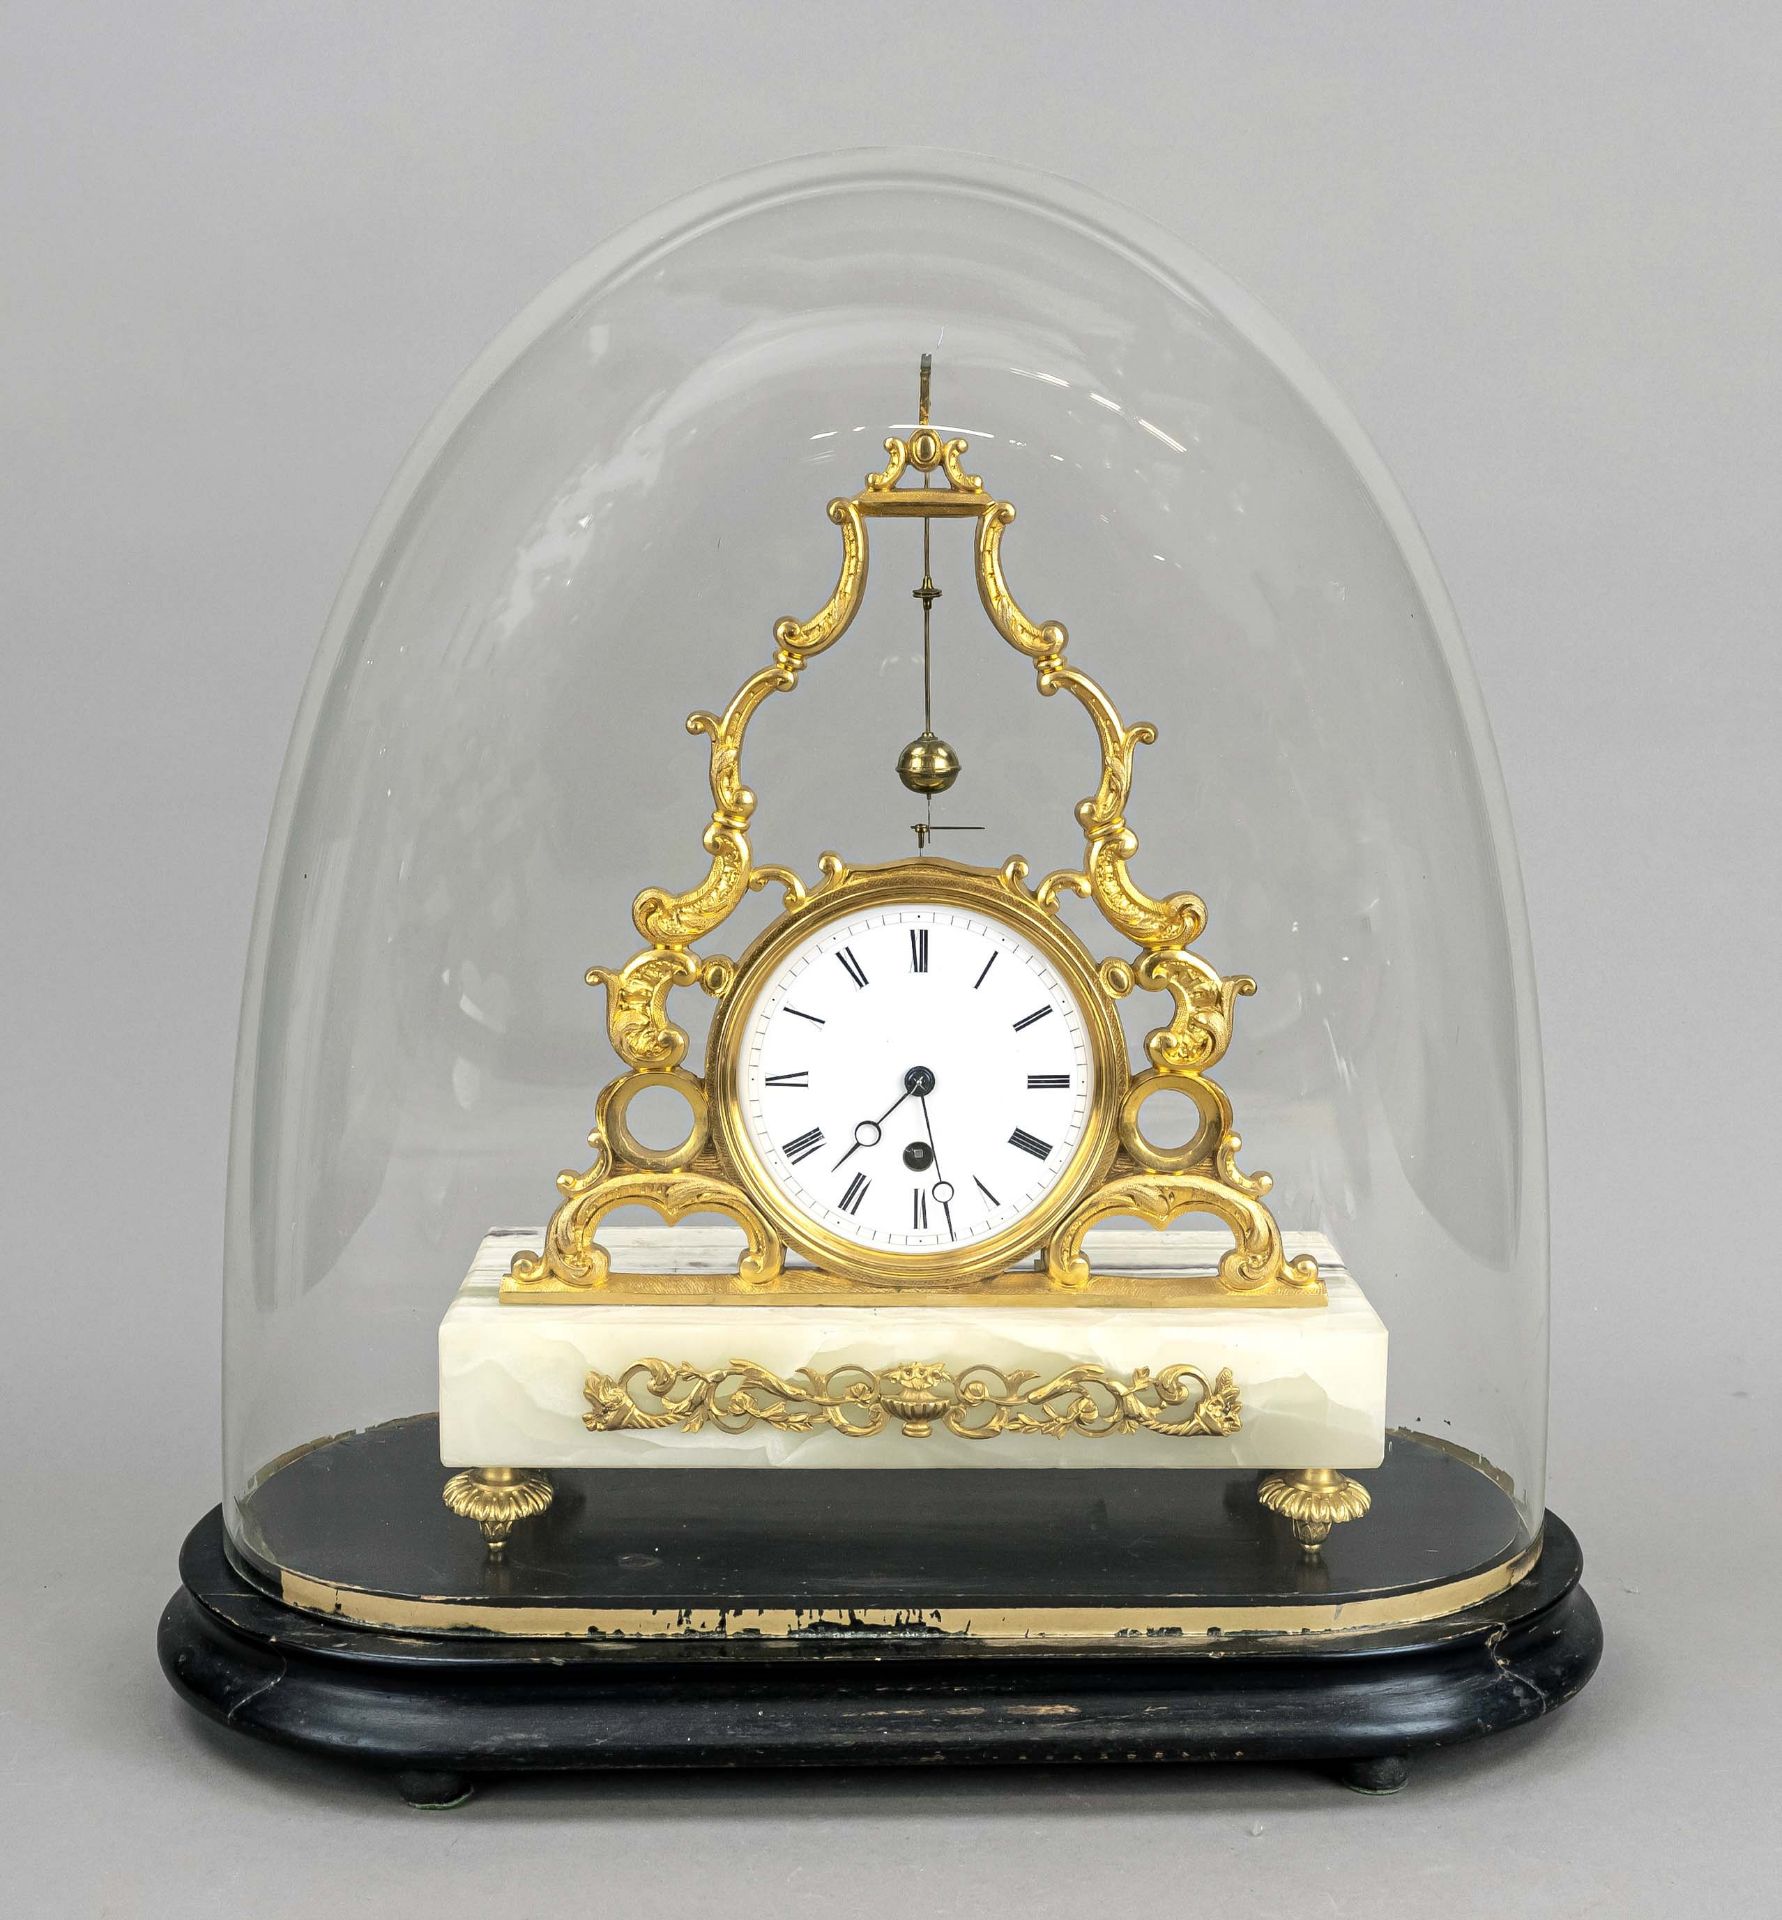 Table clock with fire-gilt body on onyx base, rocaille decorated with gilt roundels, white enamel